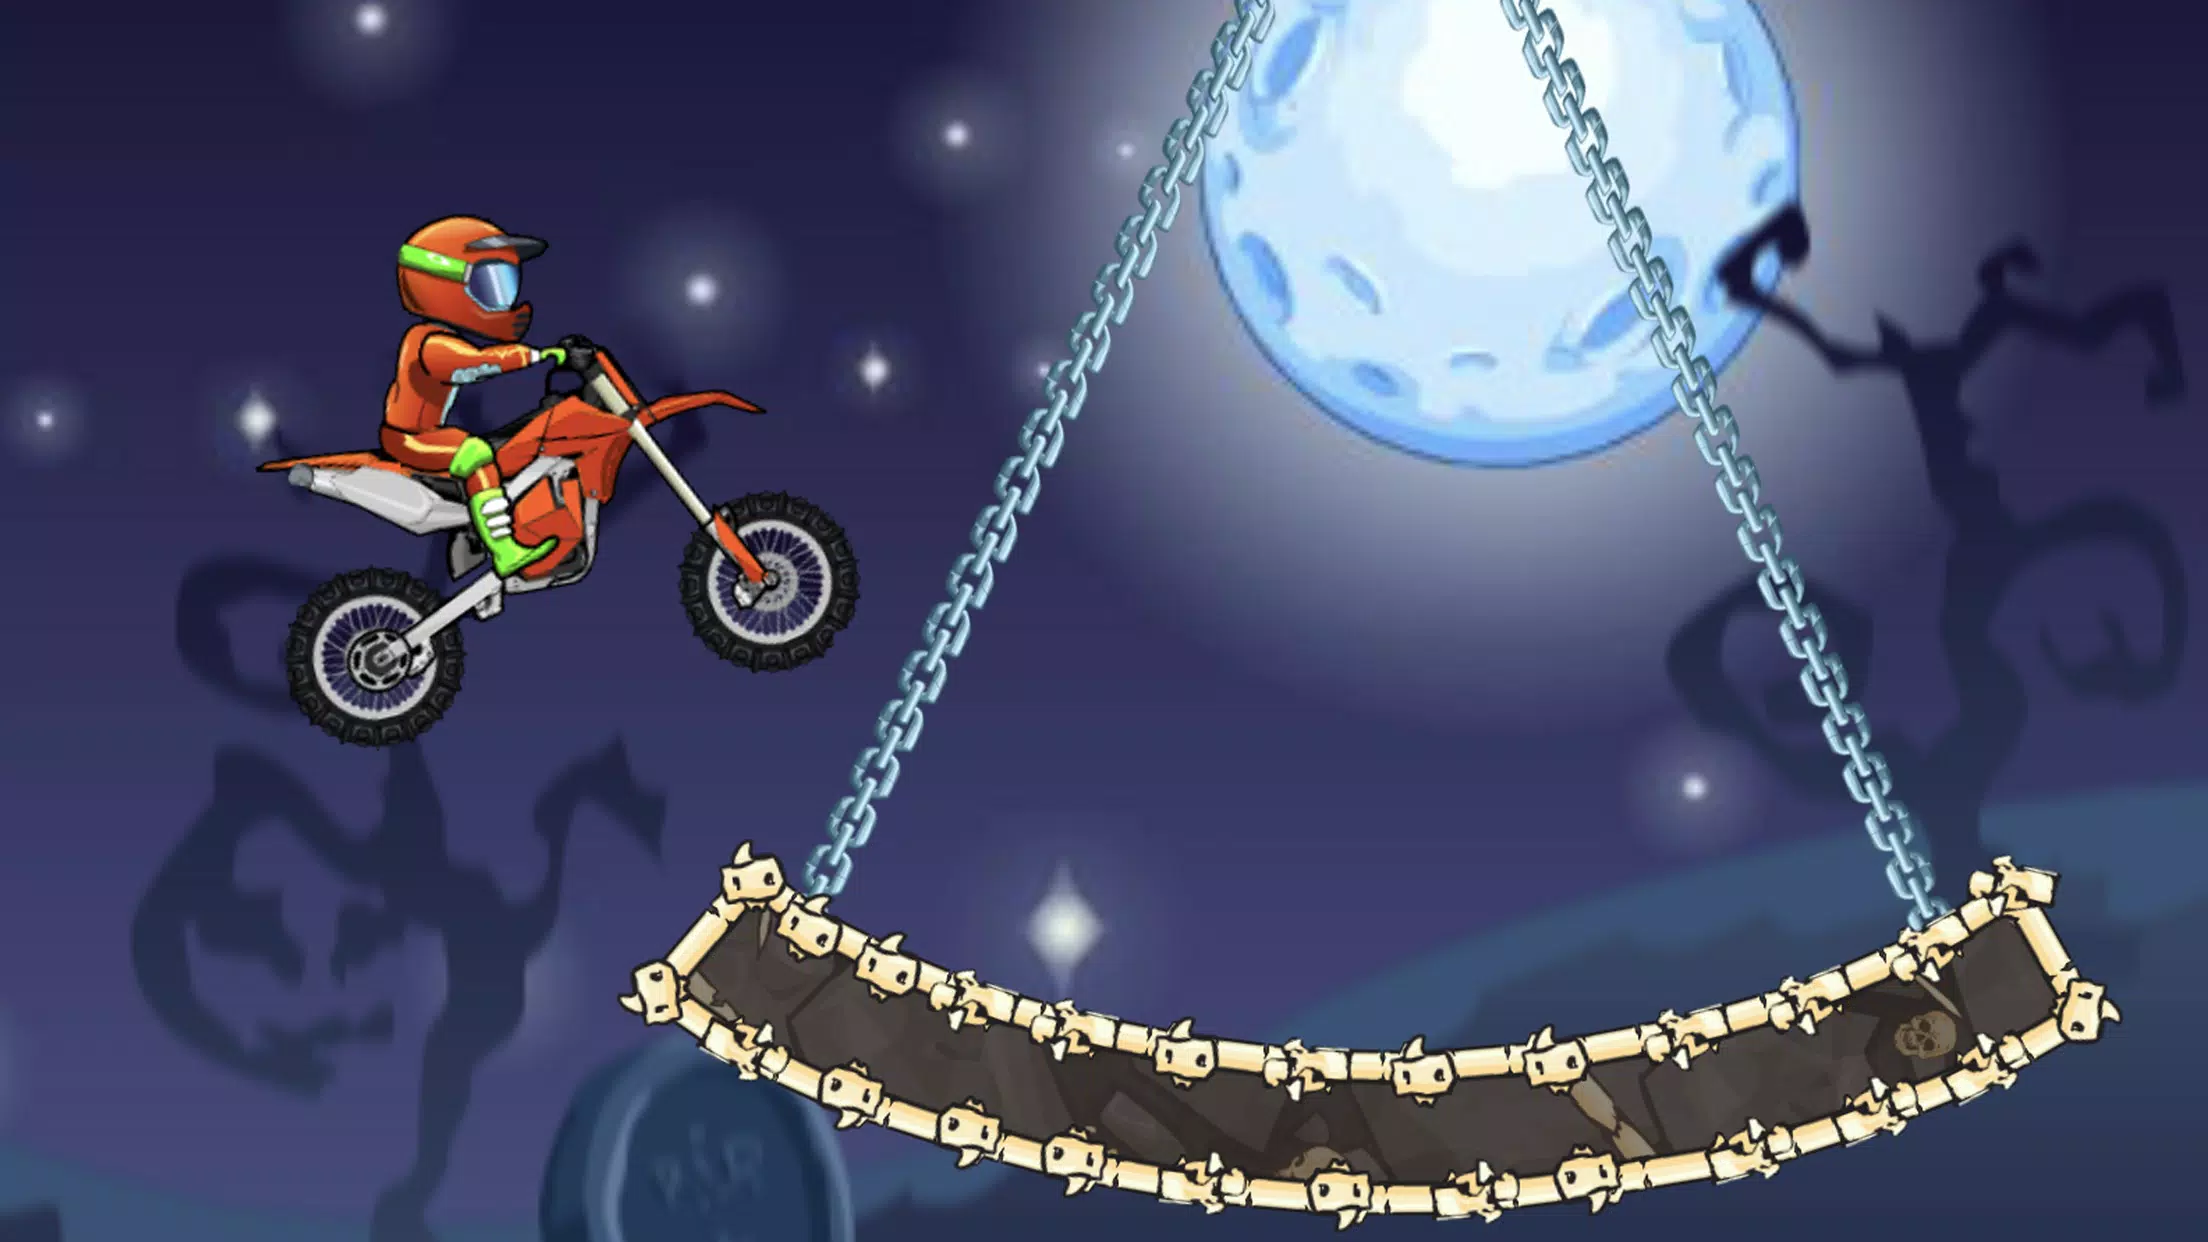 Download do APK de Guide for Moto X3M Bike Race Game para Android